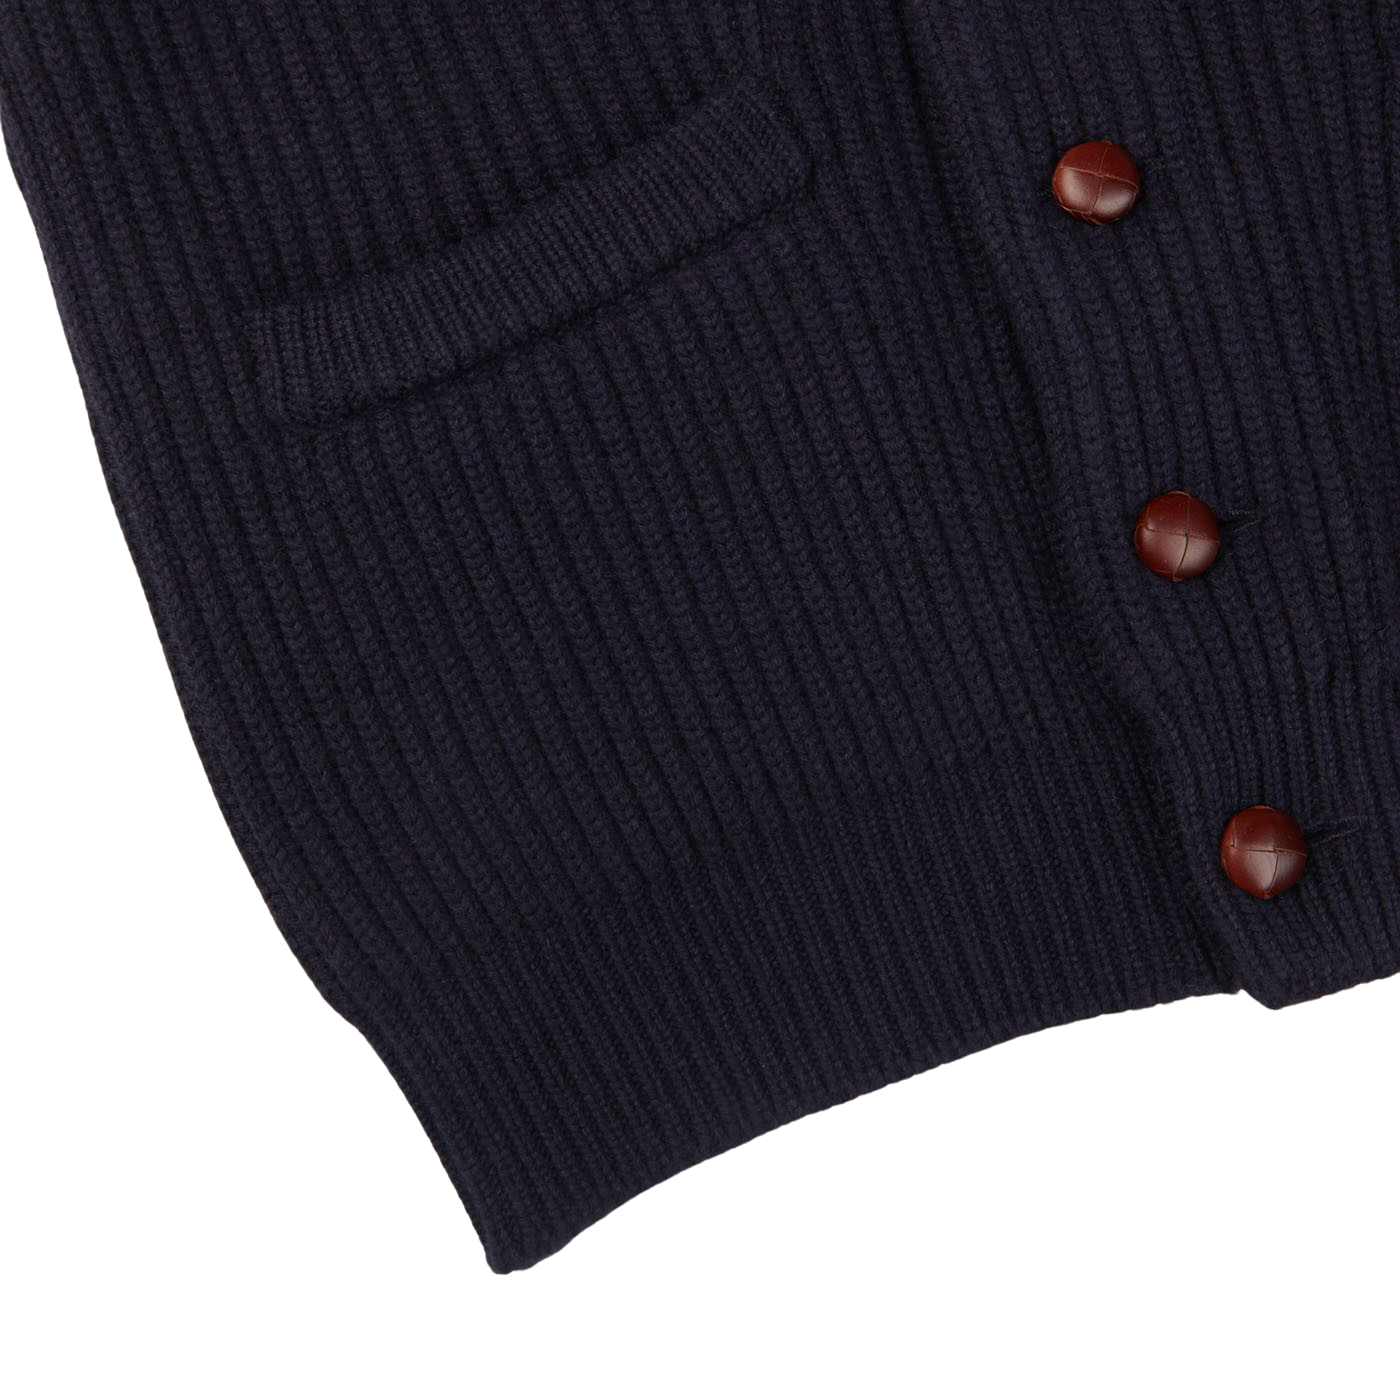 A William Lockie navy blue cashmere shawl collar cardigan with leather buttons on the front.